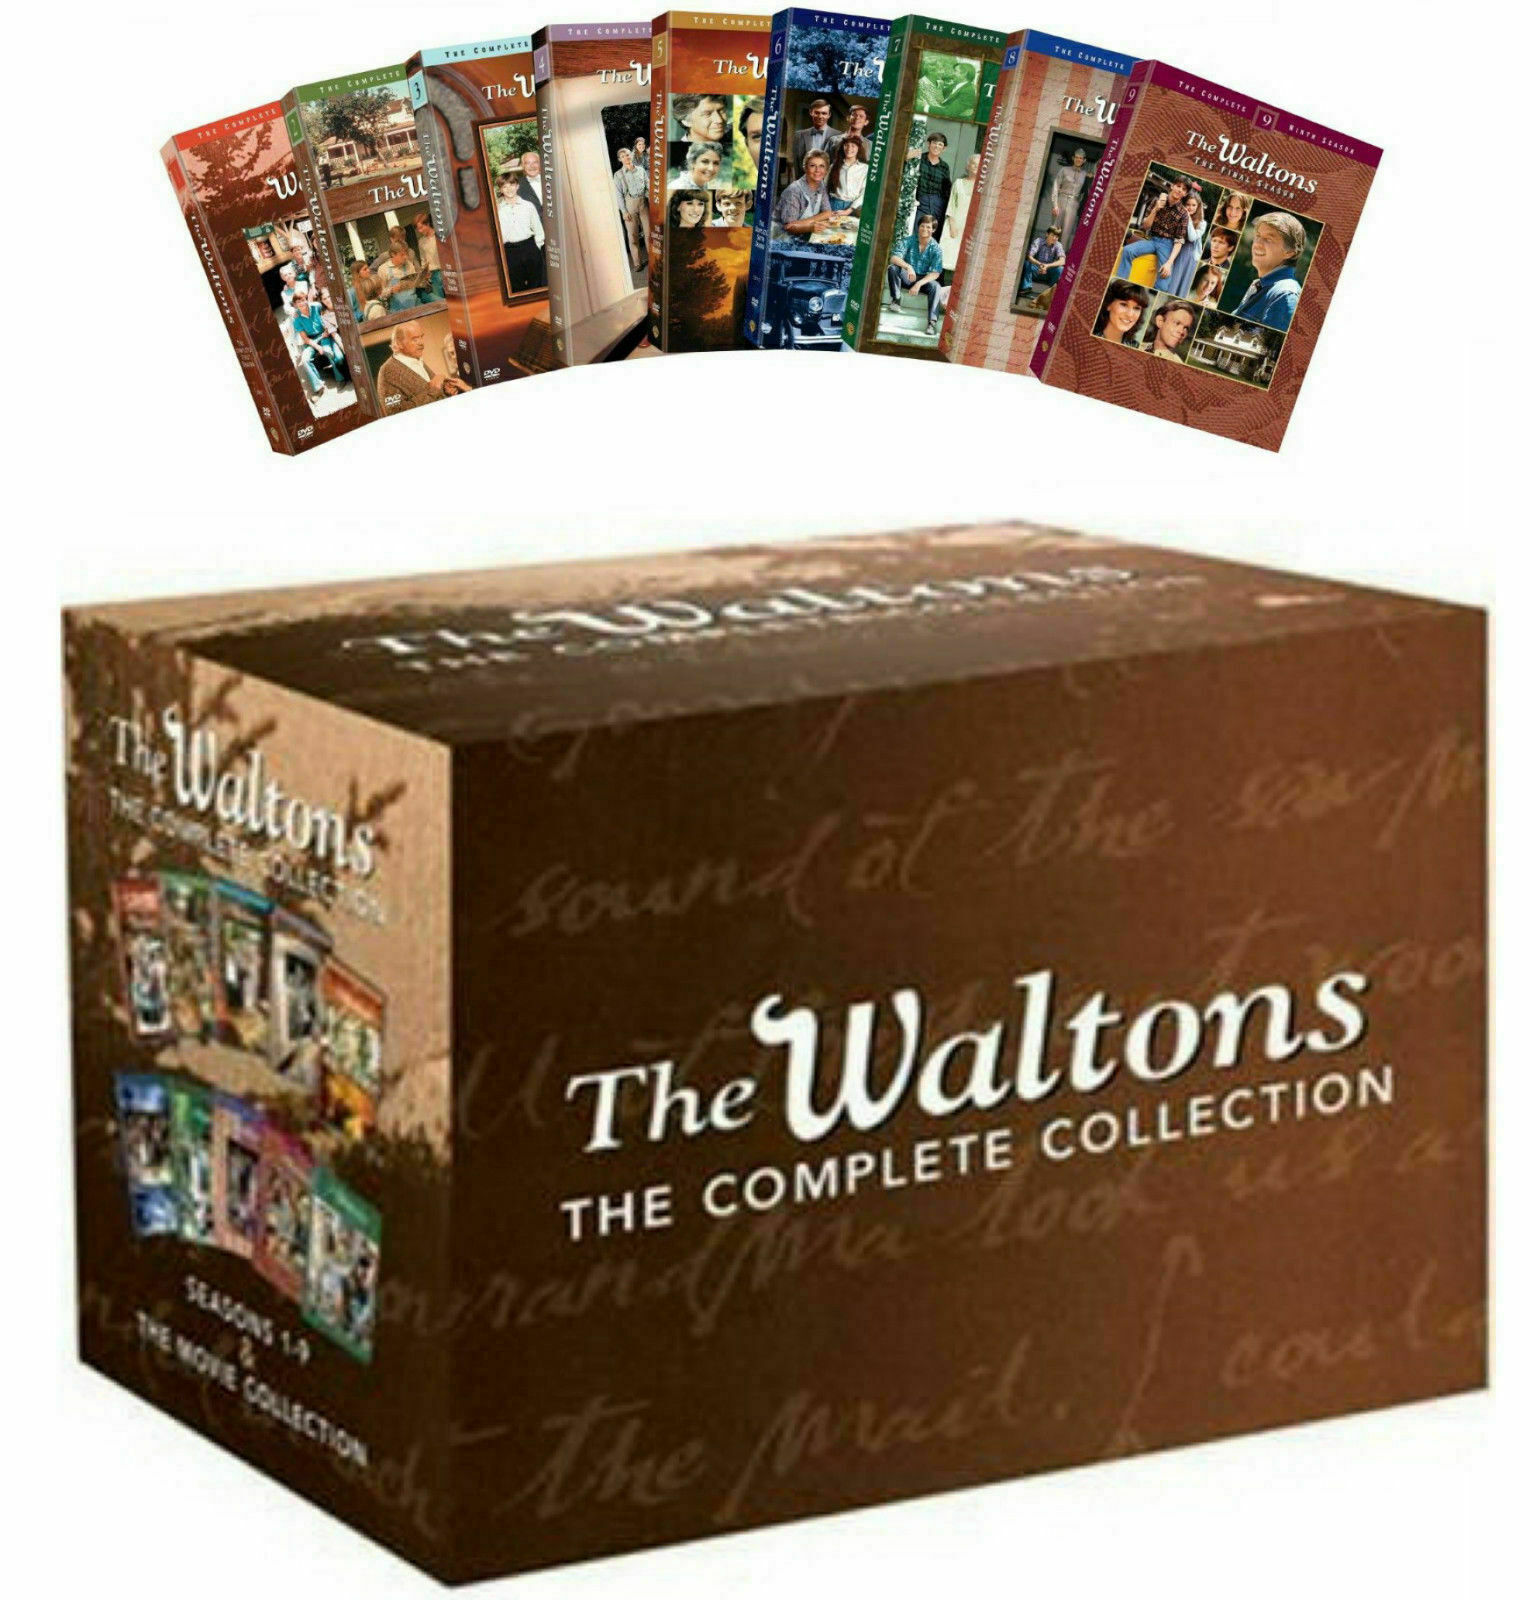 Primary image for The Waltons Complete Series DVD Box Set Seasons 1-9 + 6 Movies 